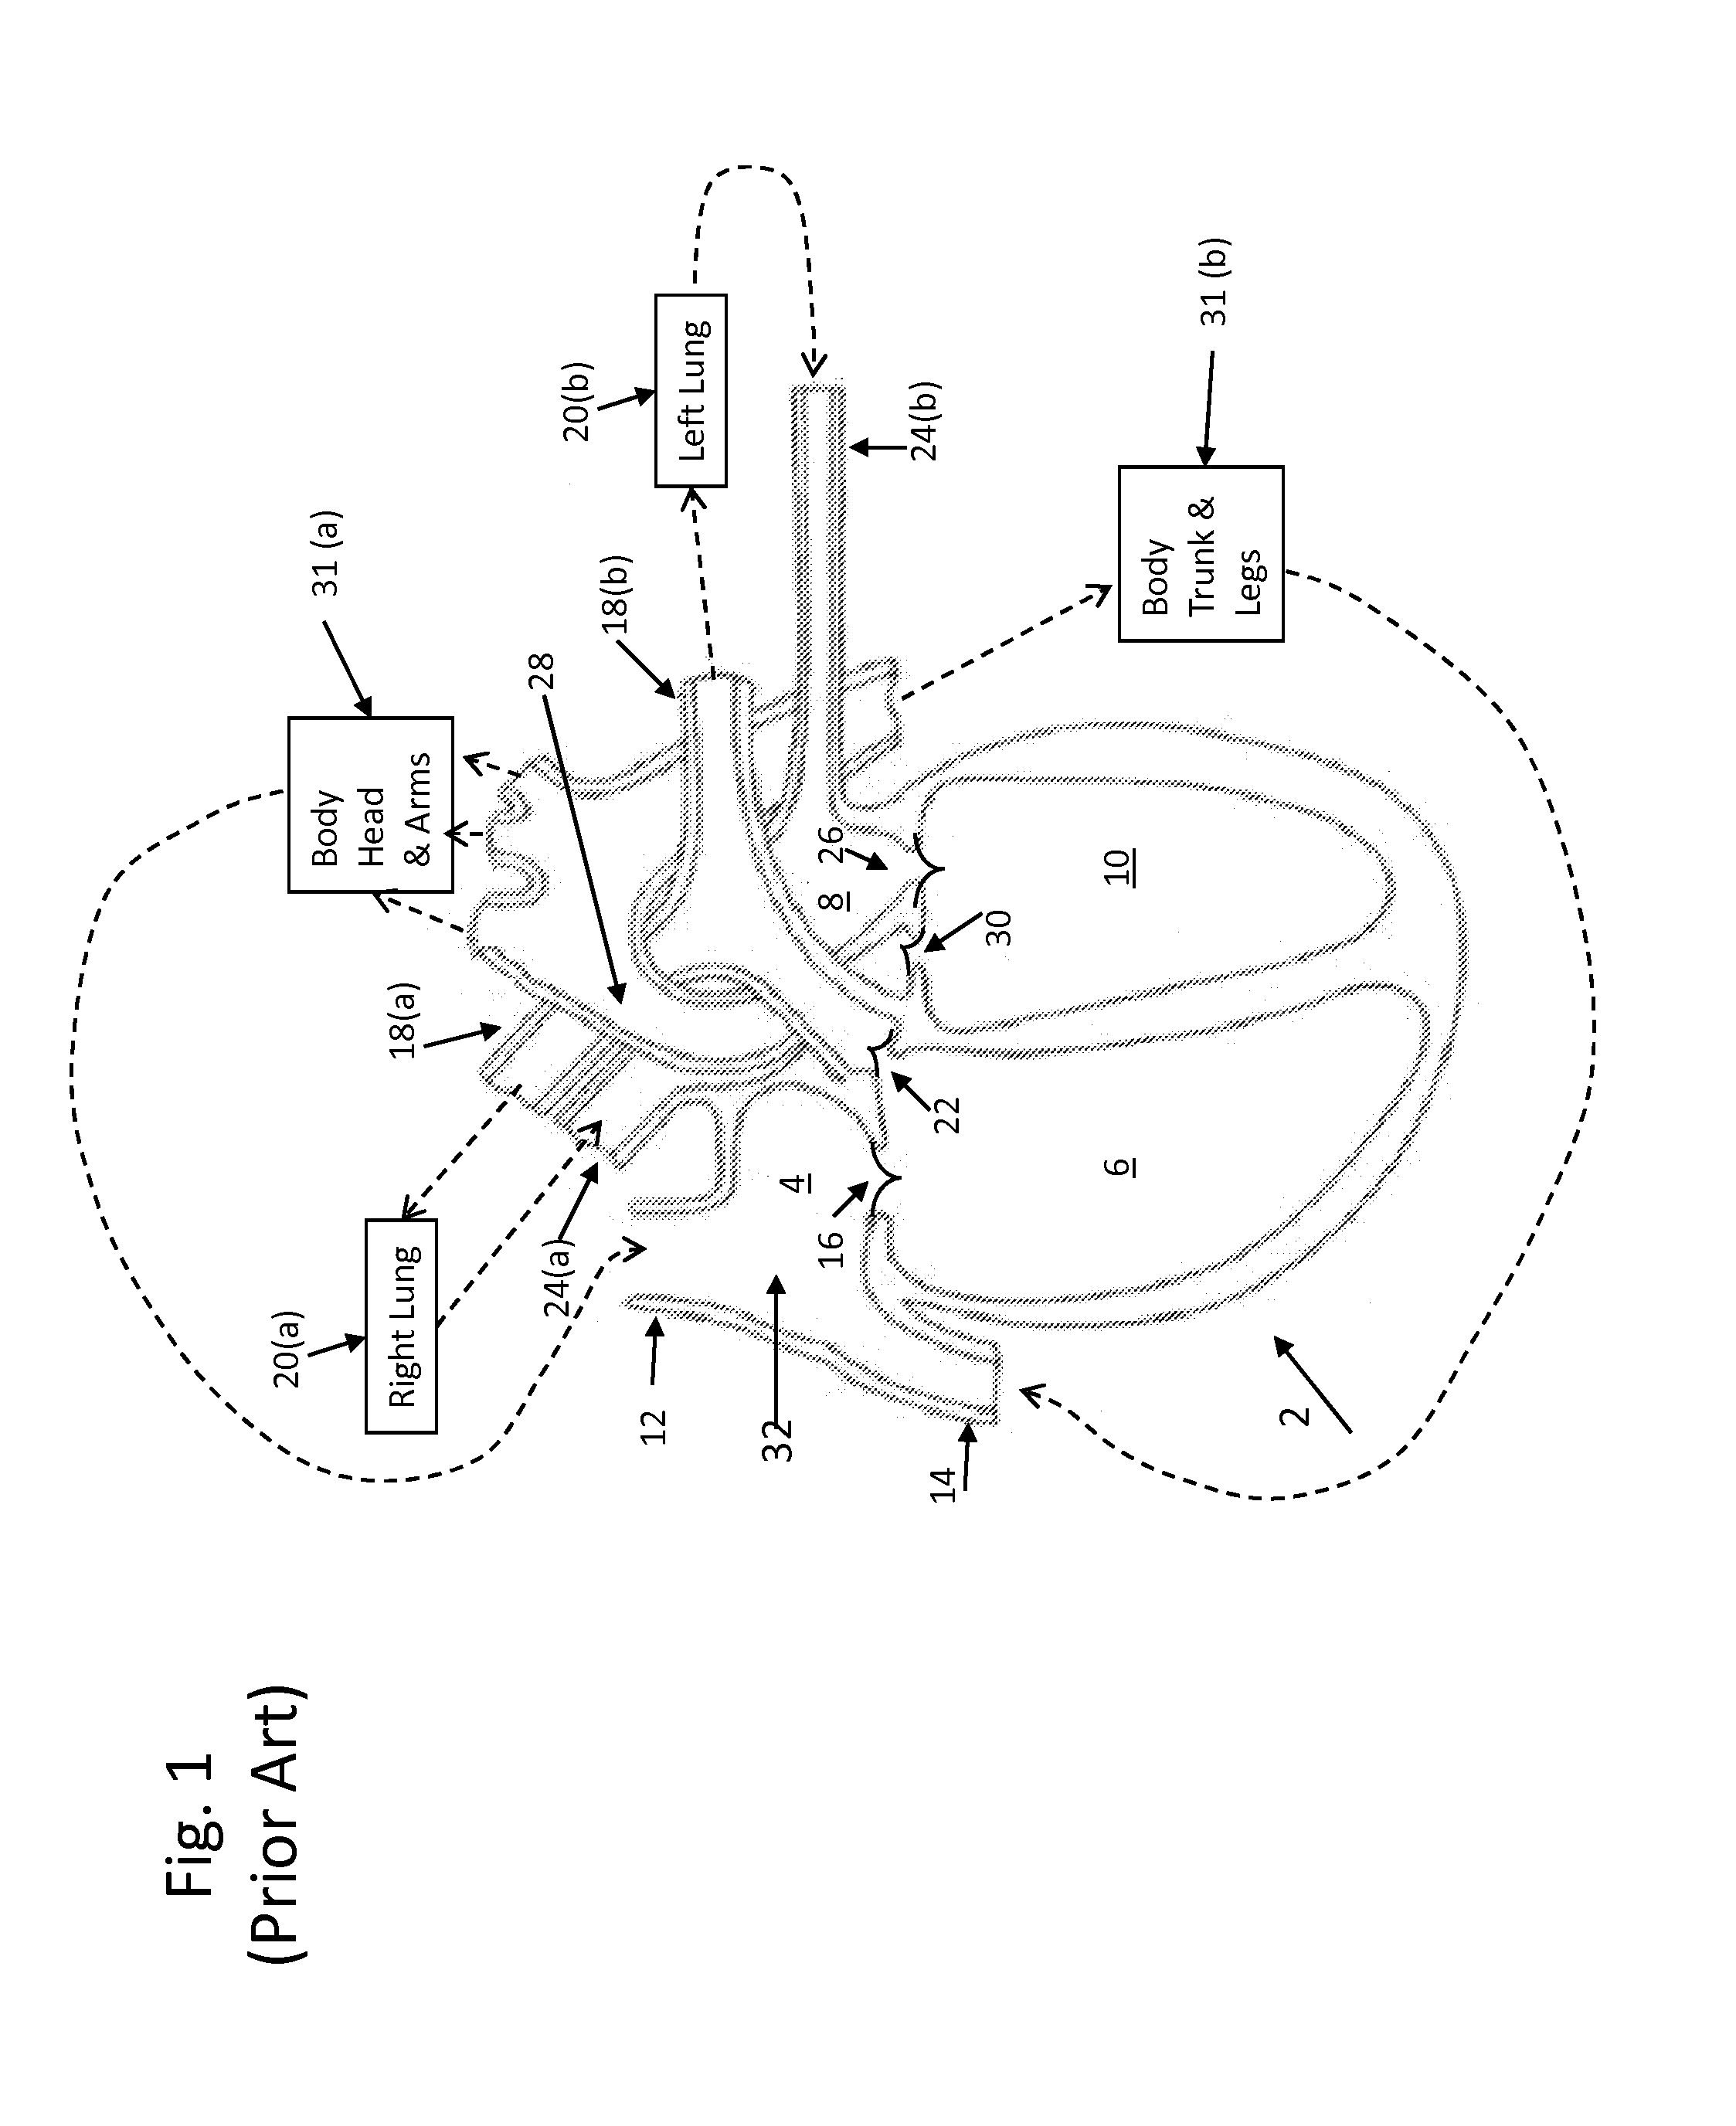 System and method for monitoring cardiac output, flow balance, and performance parameters